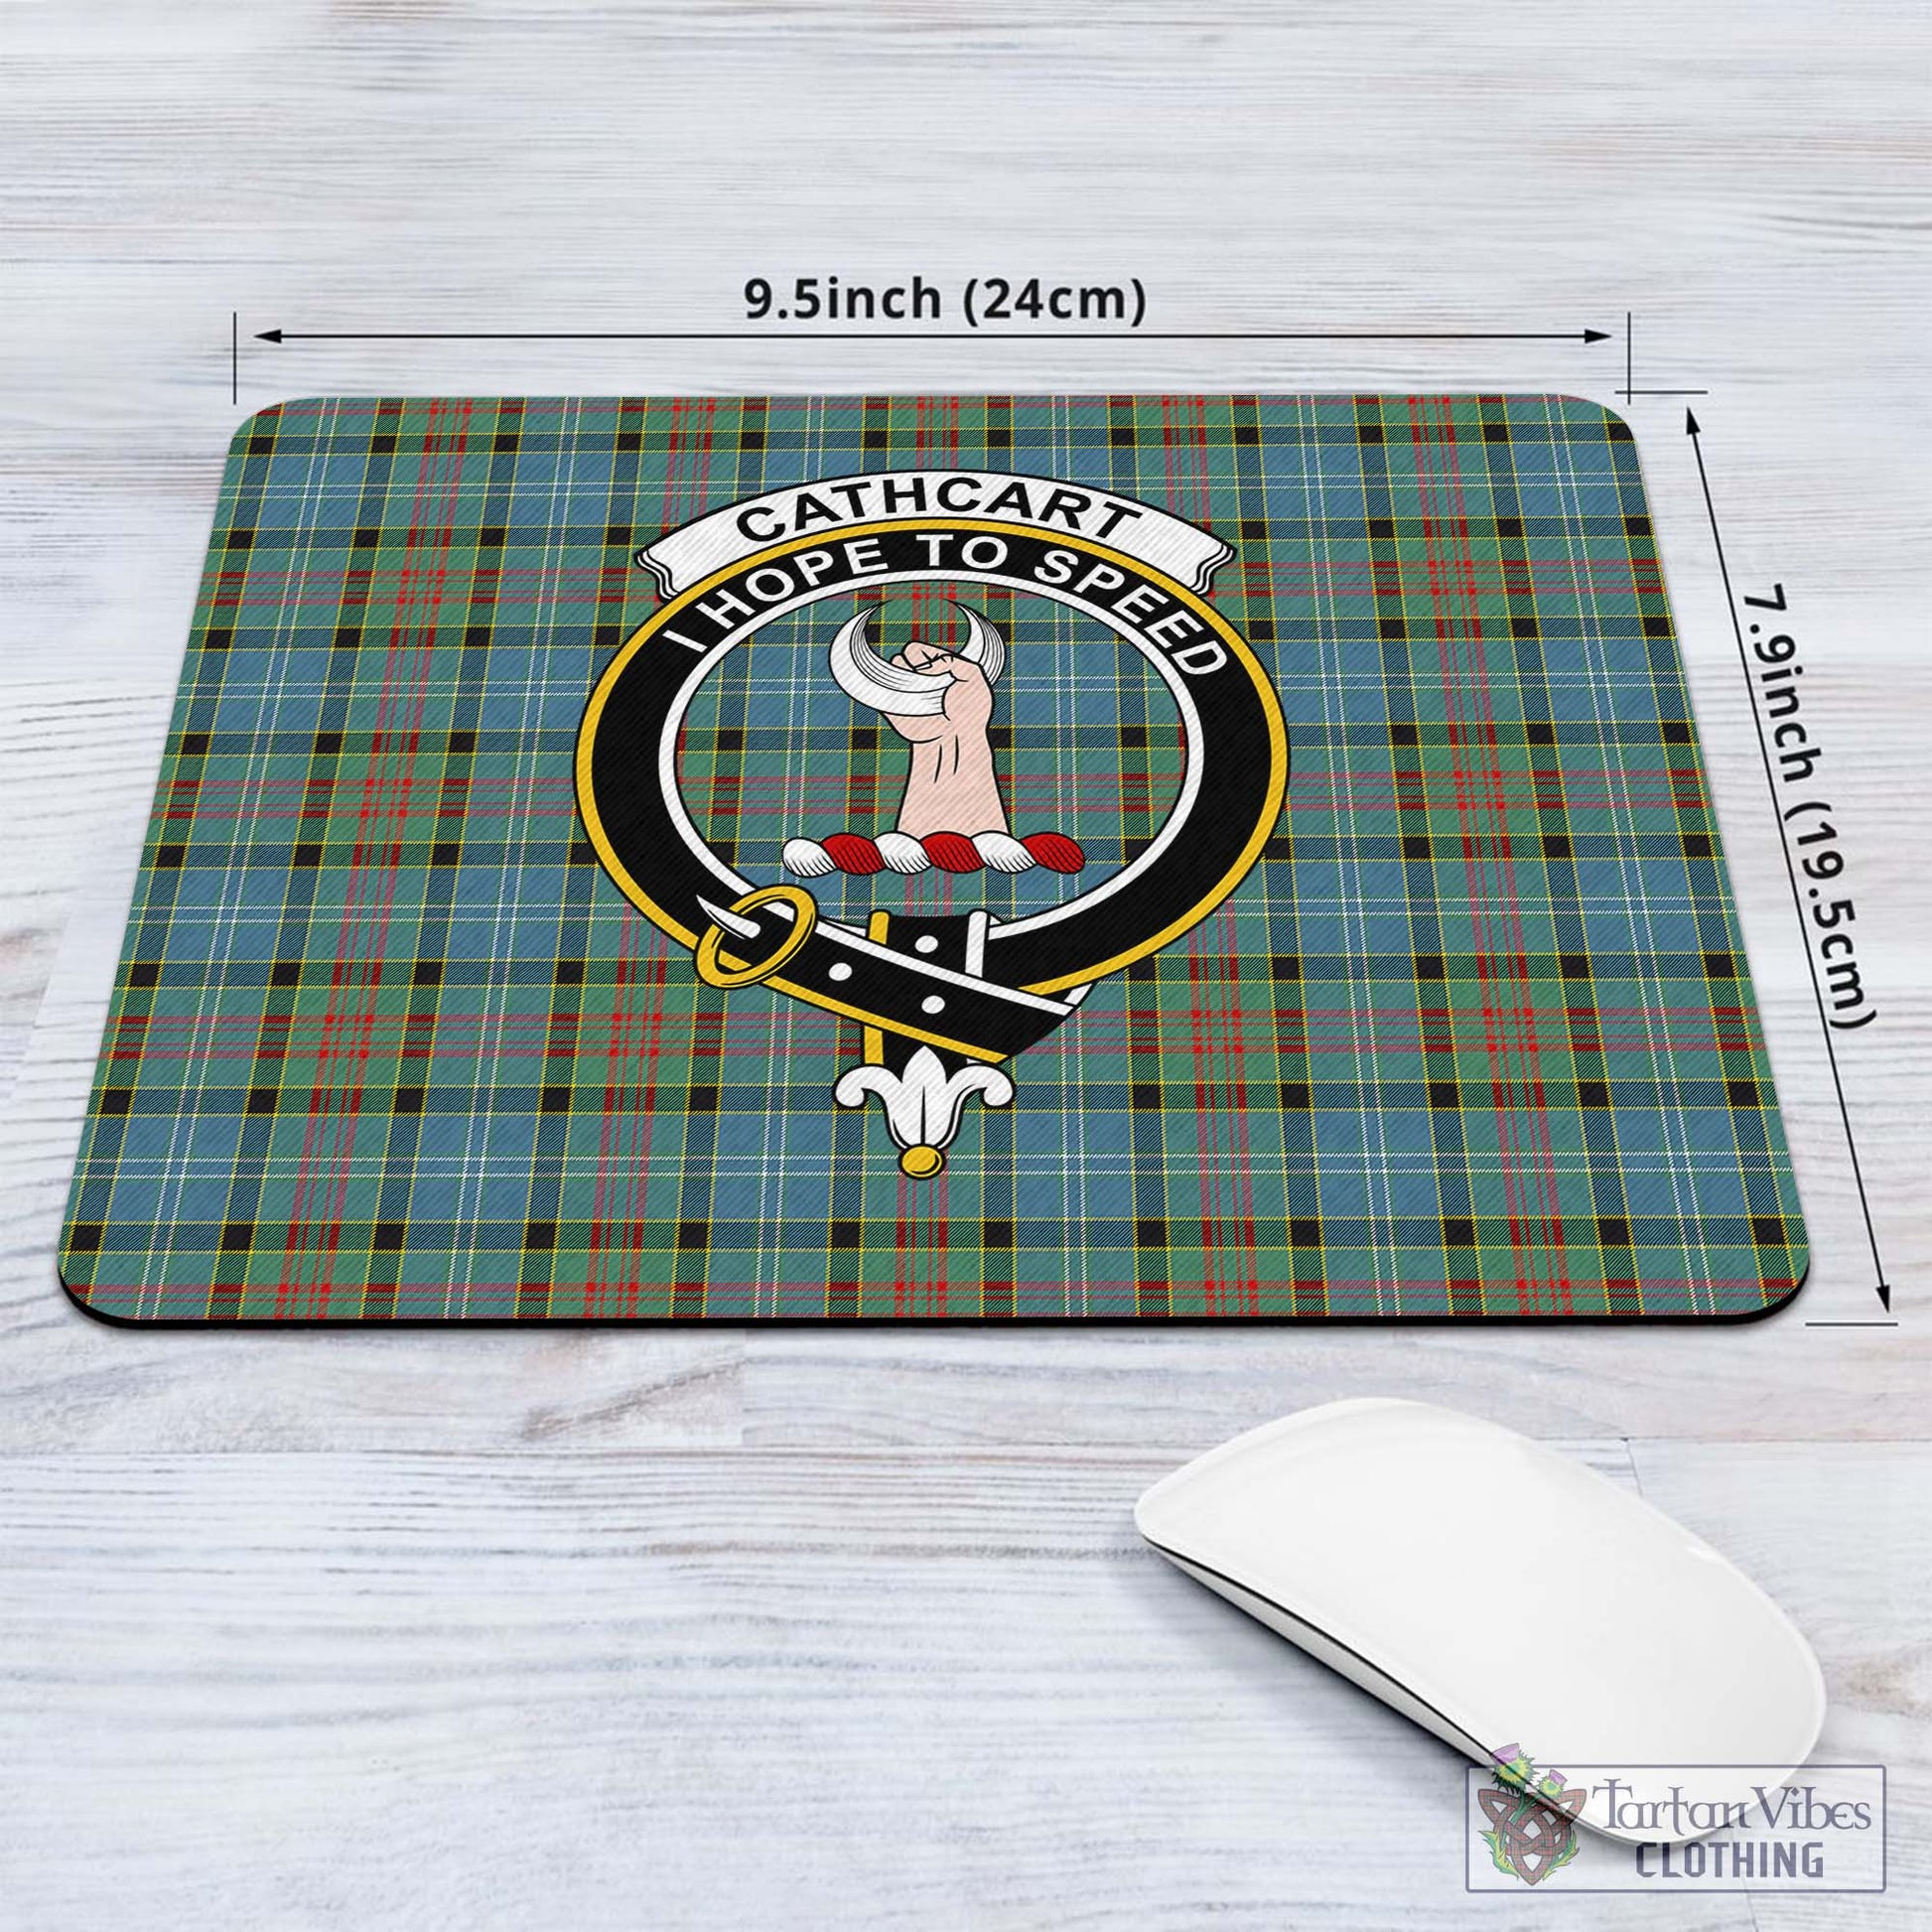 Tartan Vibes Clothing Cathcart Tartan Mouse Pad with Family Crest